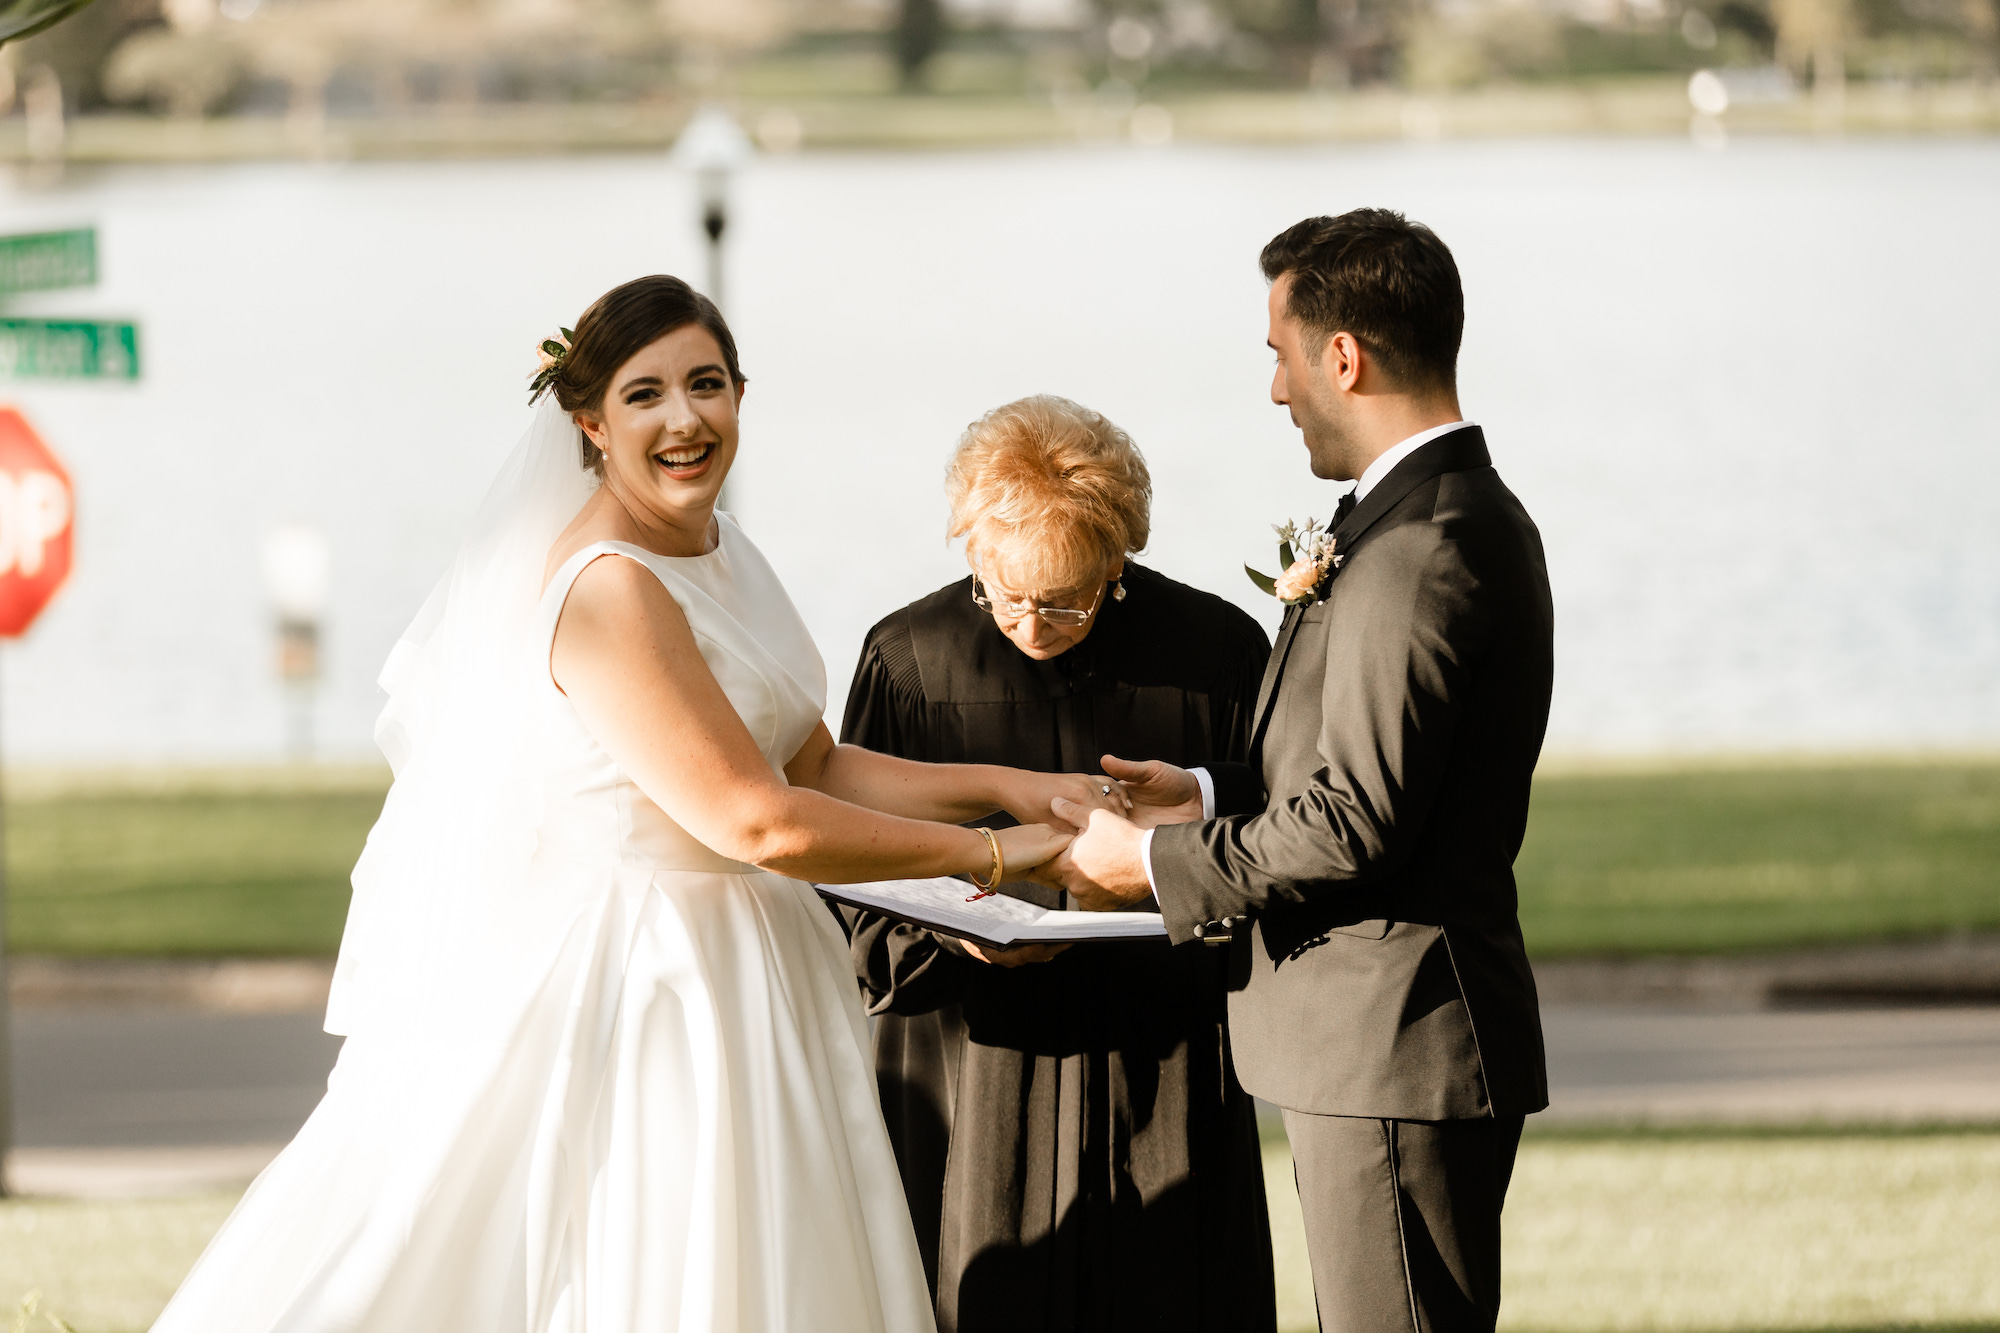 Bride and Groom Vow Reading | Lakeside Wedding Ceremony Ideas